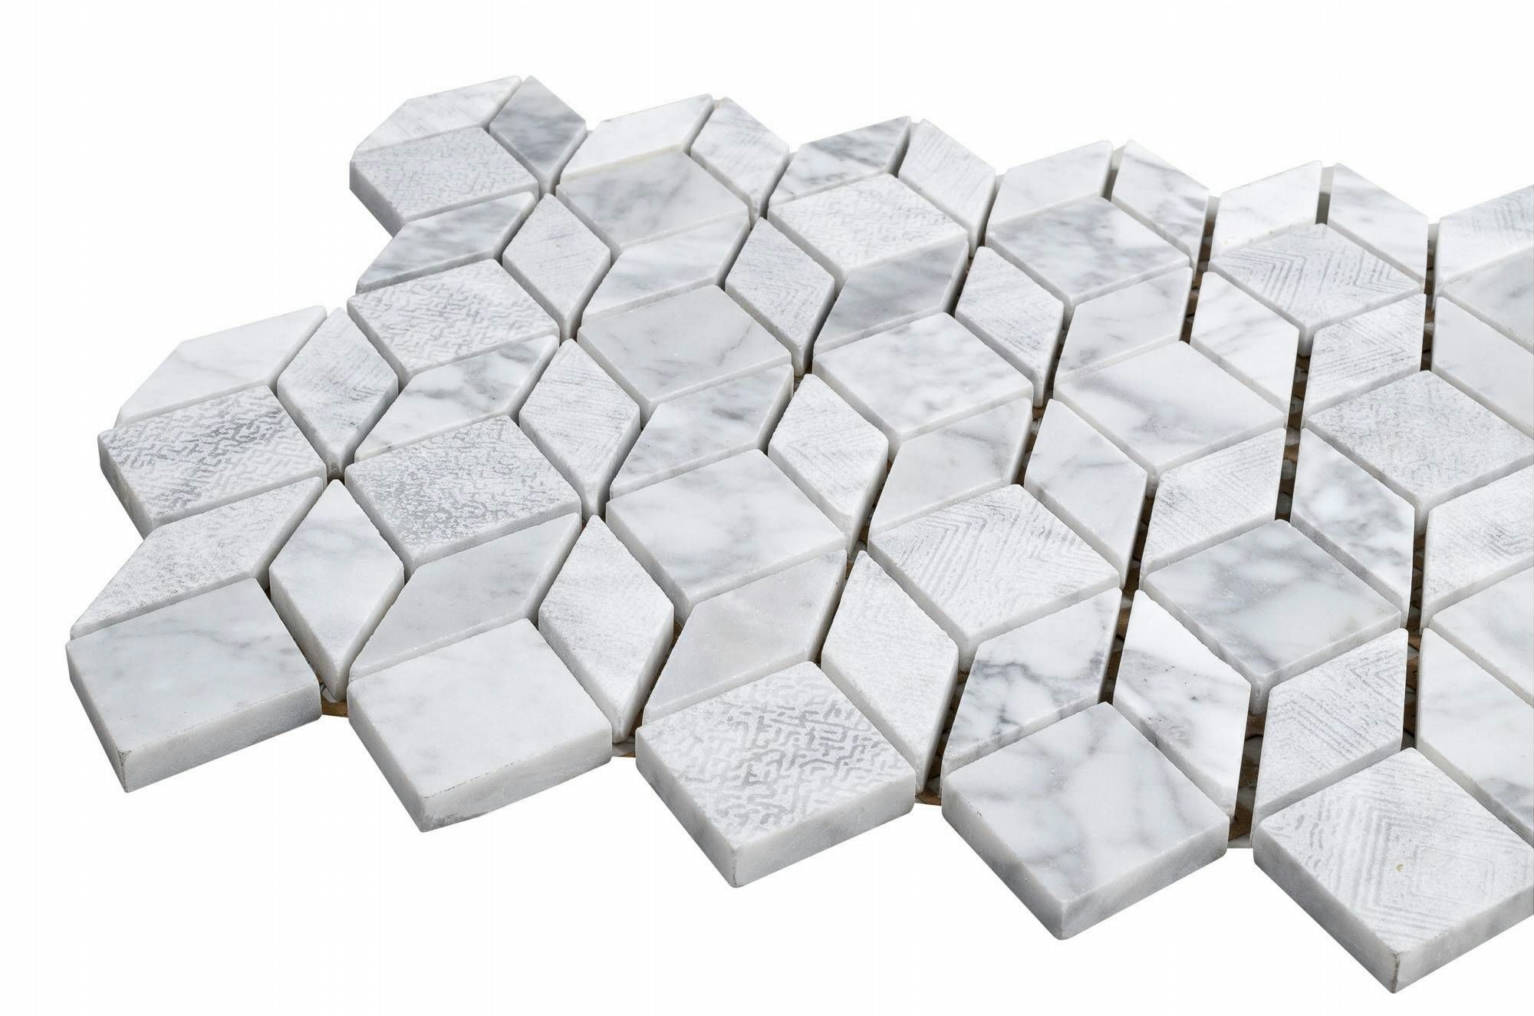 BN010 | Stones And More | Finest selection of Mosaics, Glass, Tile and Stone